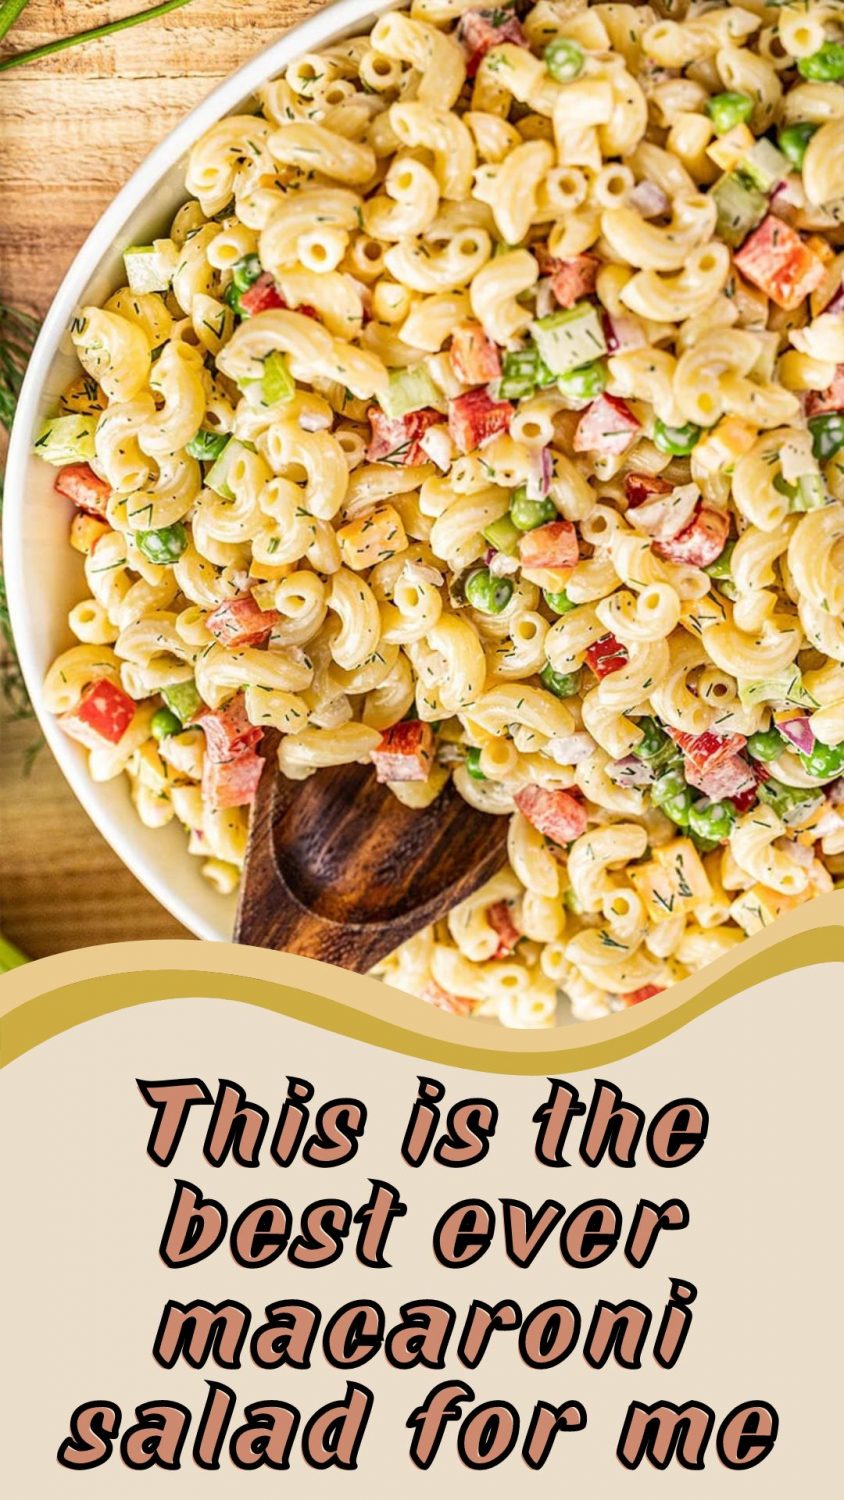 This is the best ever macaroni salad for me